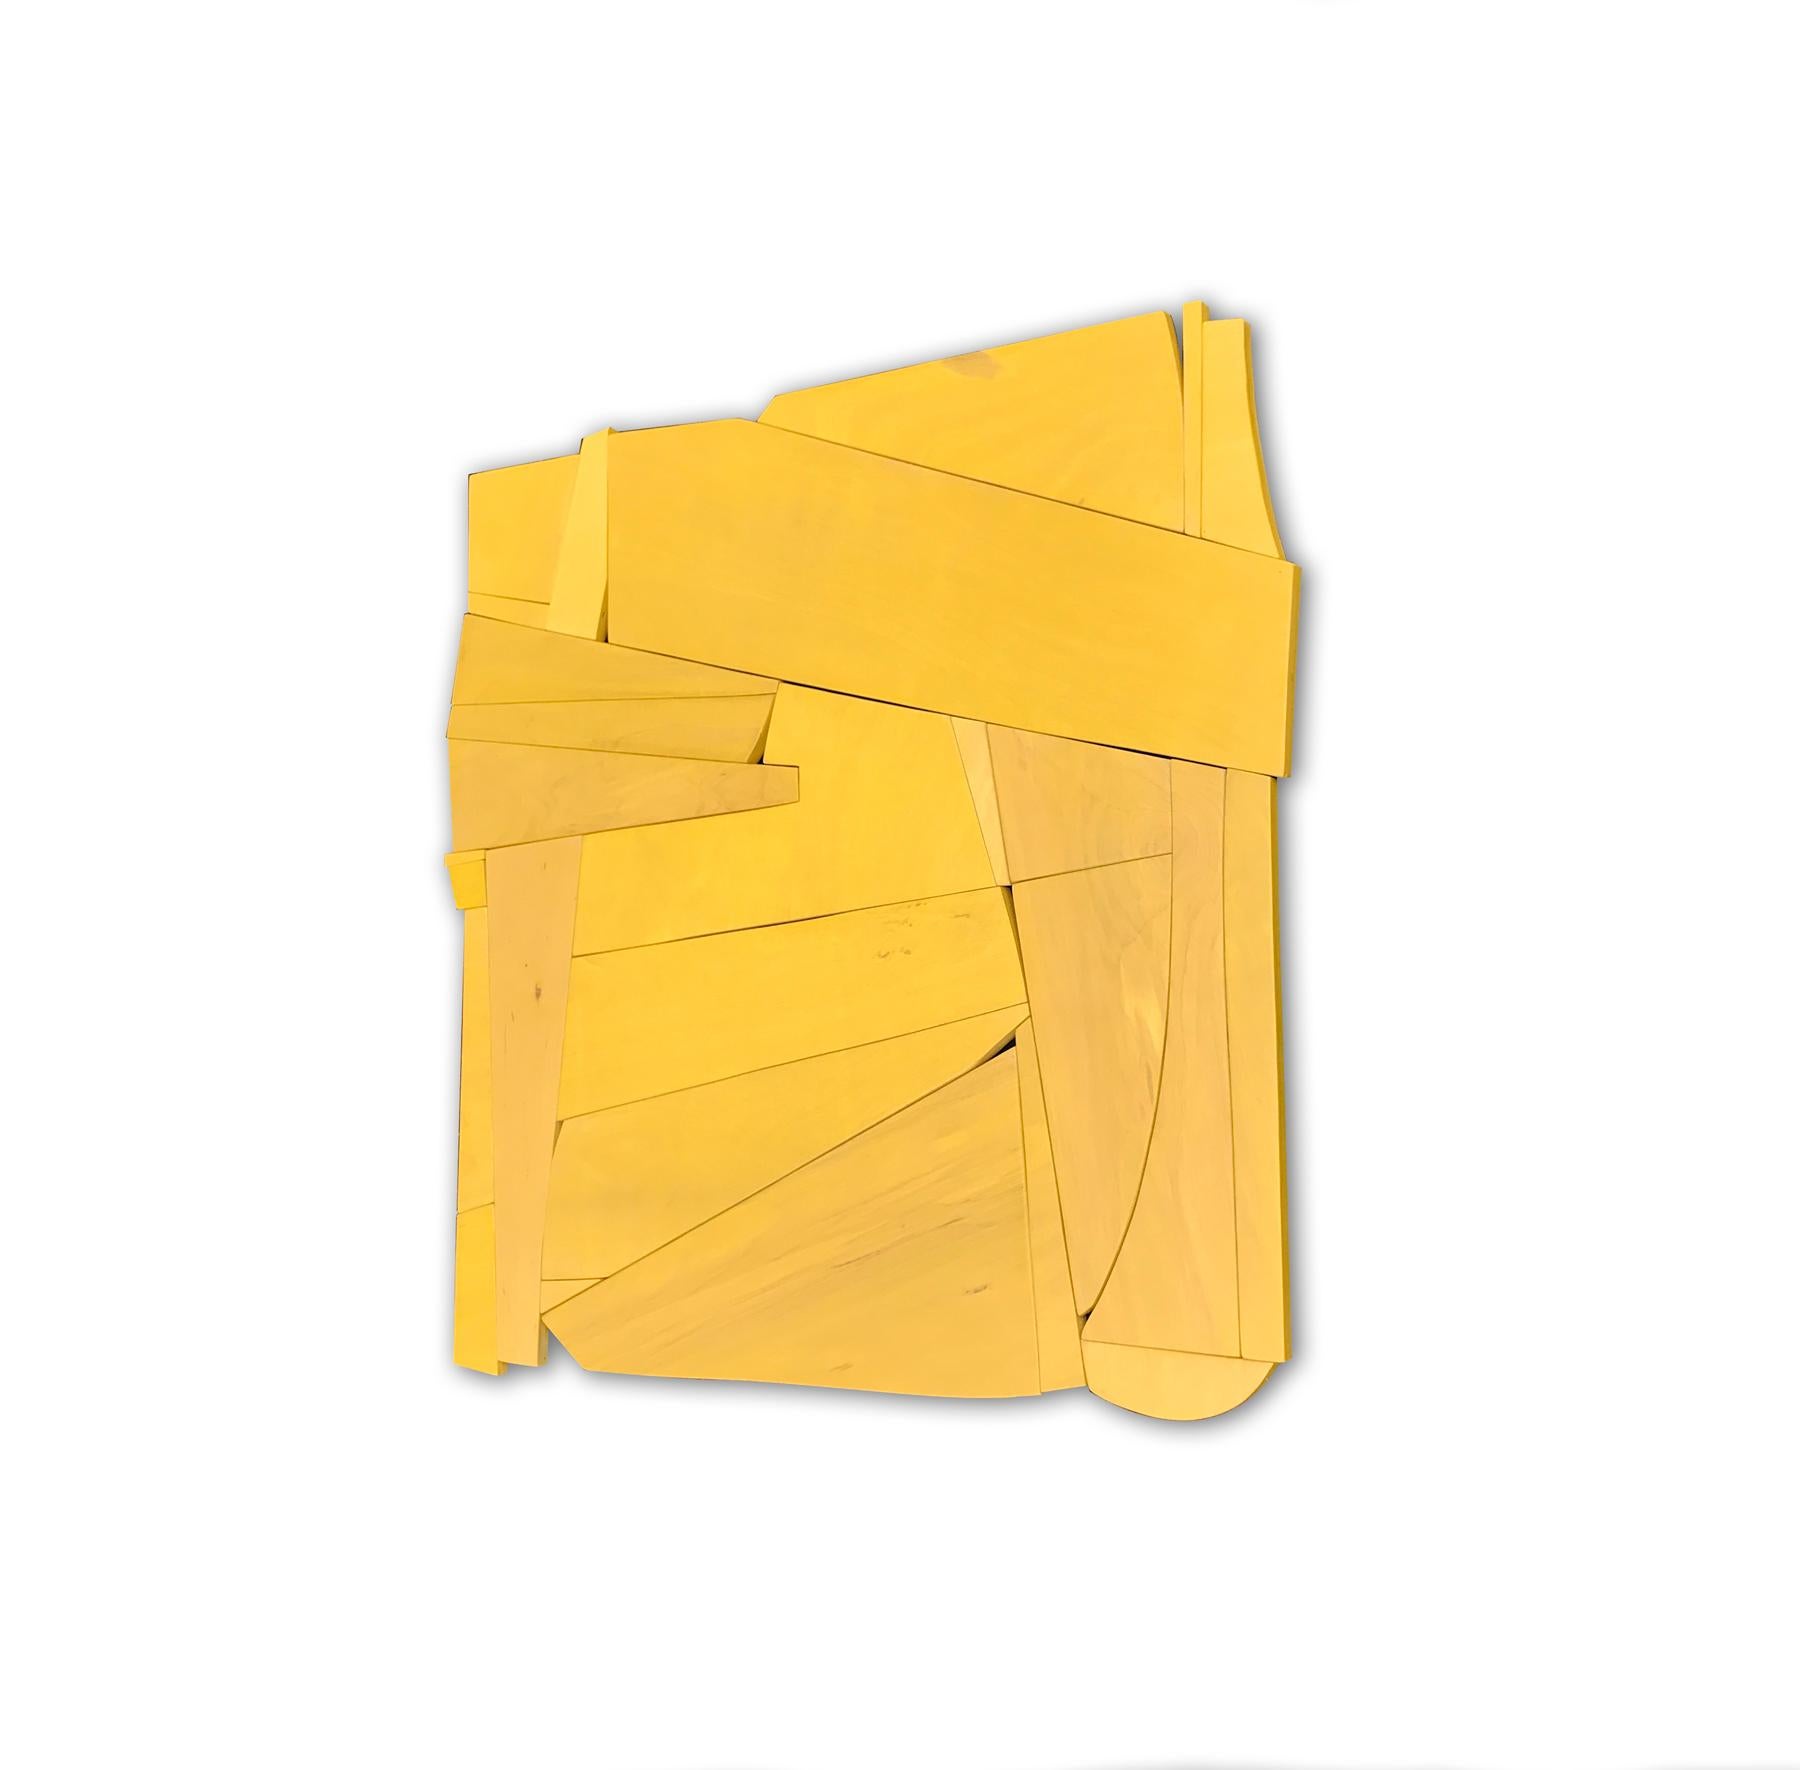 Cornflower II (yellow ochre abstract wall sculpture minimal geometric design ) - Brown Abstract Painting by Scott Troxel